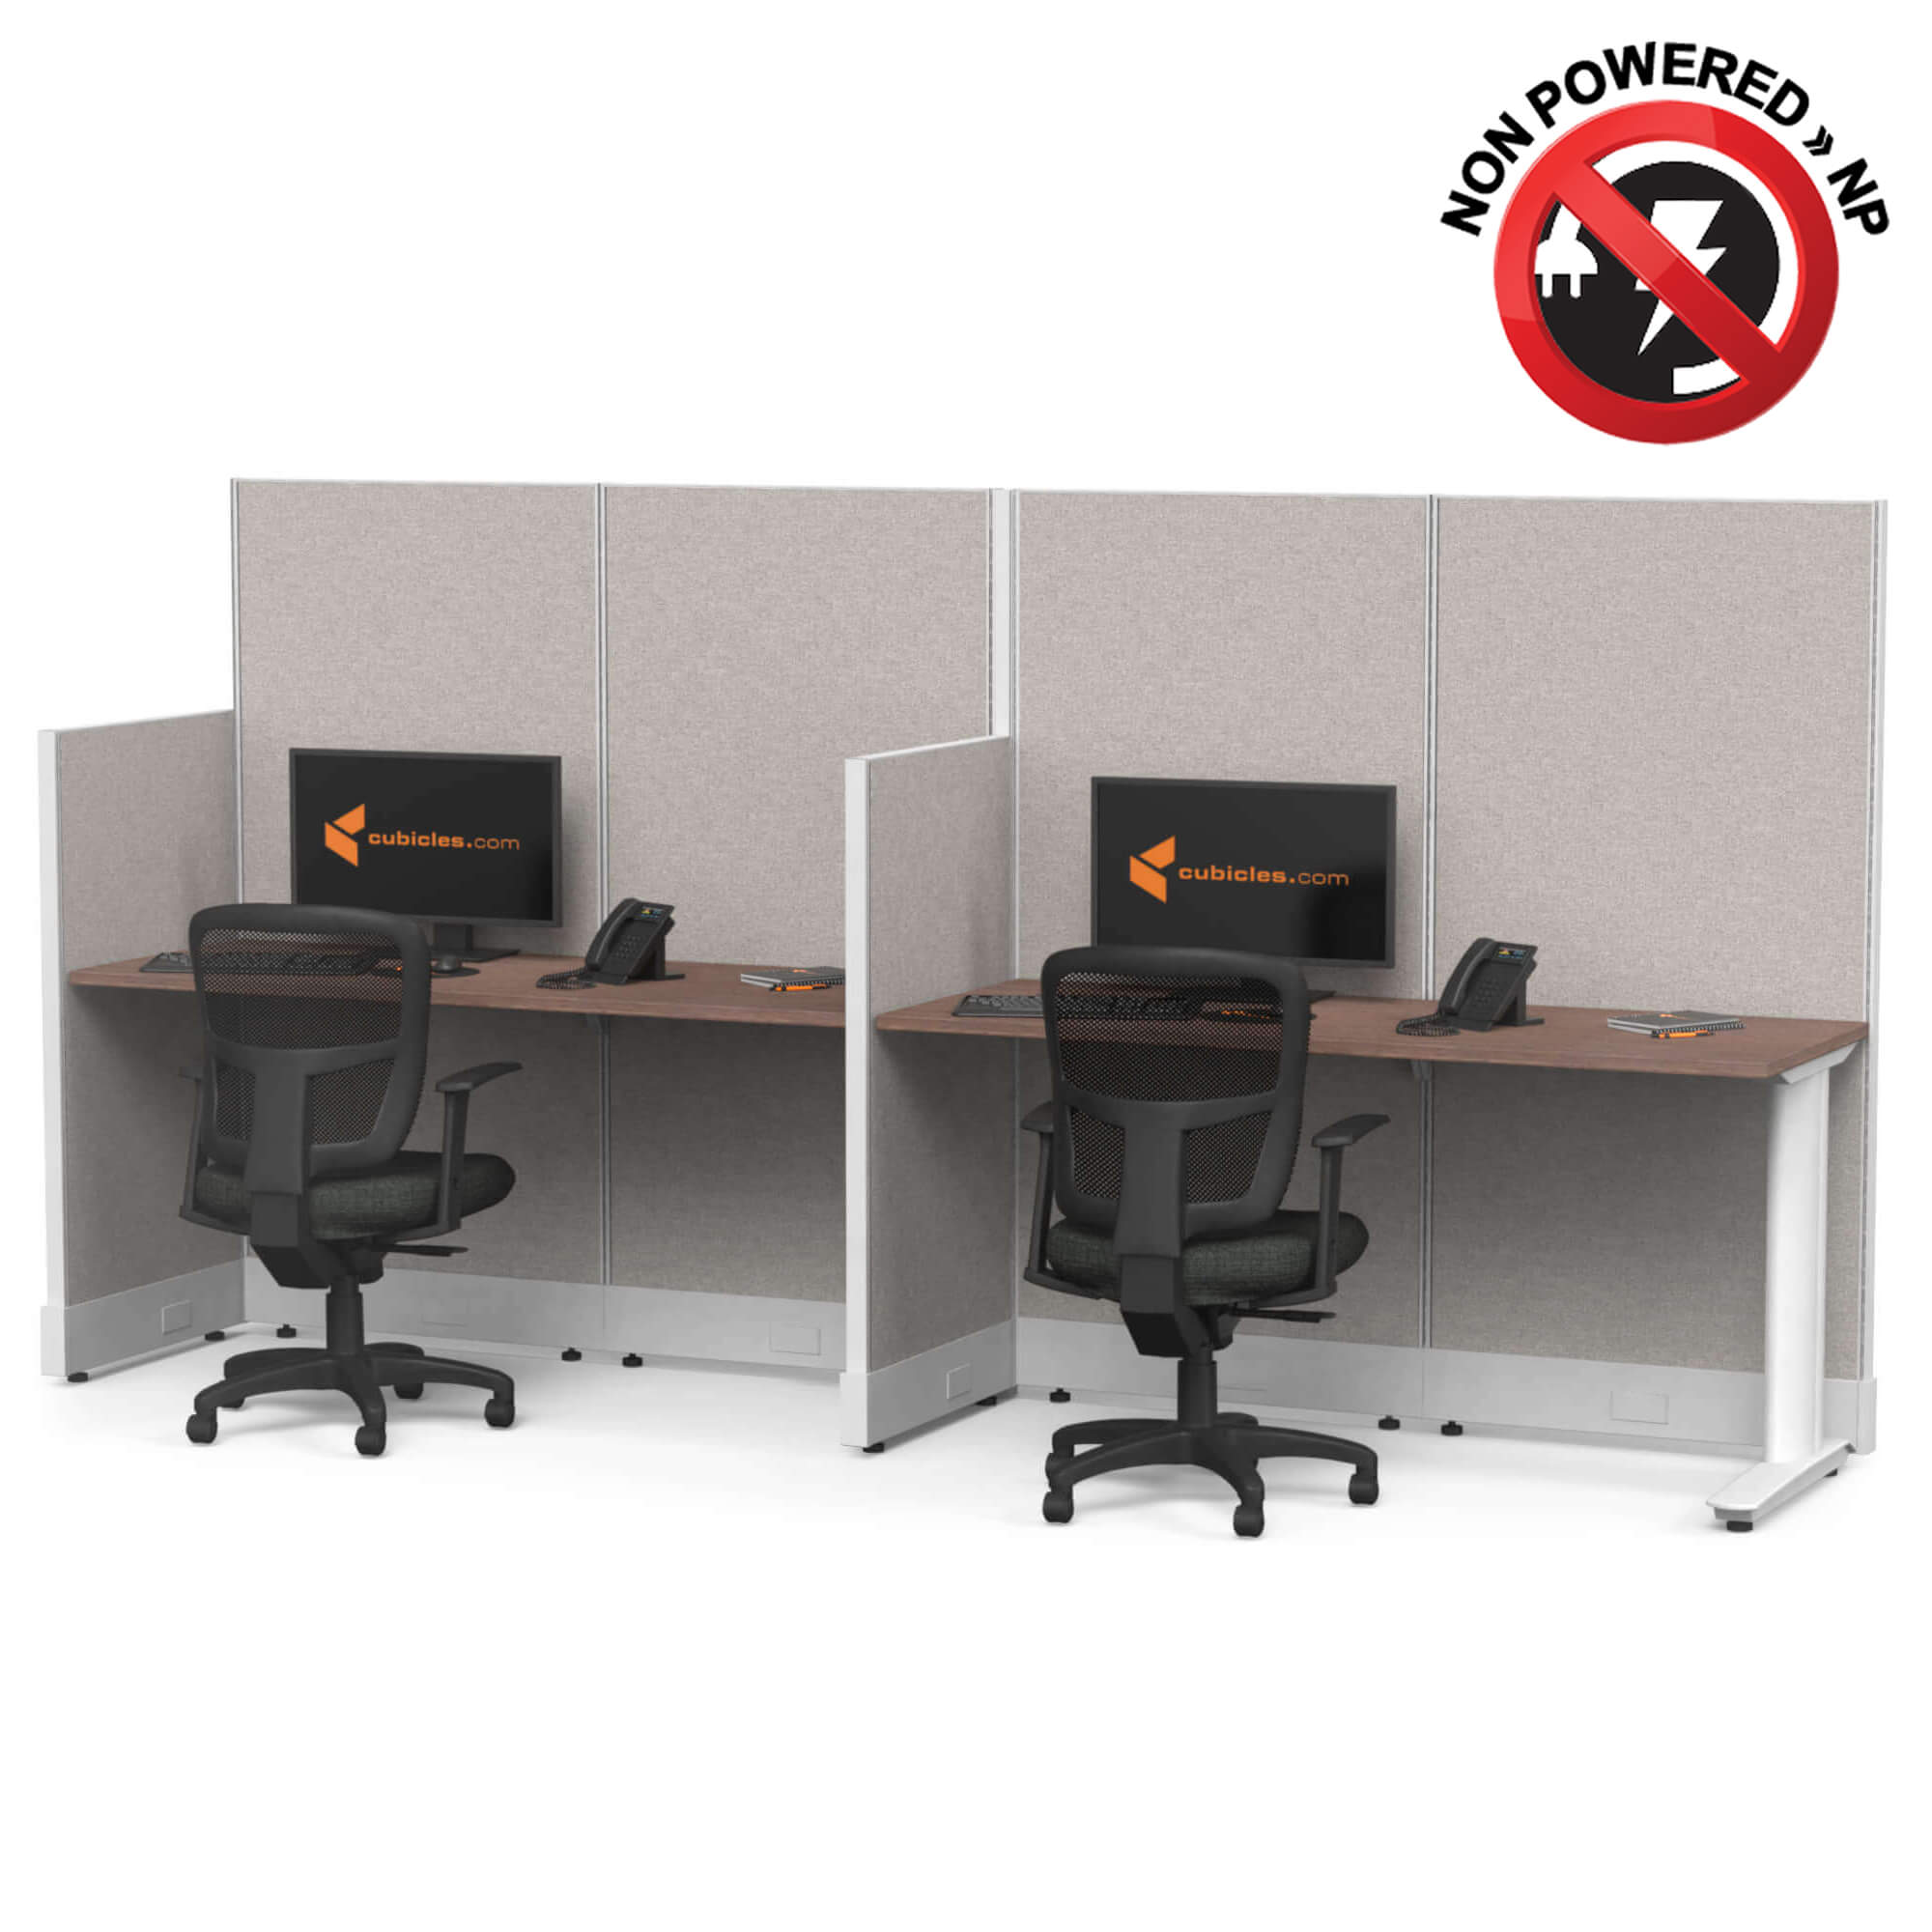 Cubicle desk straight 2pack non powered sign